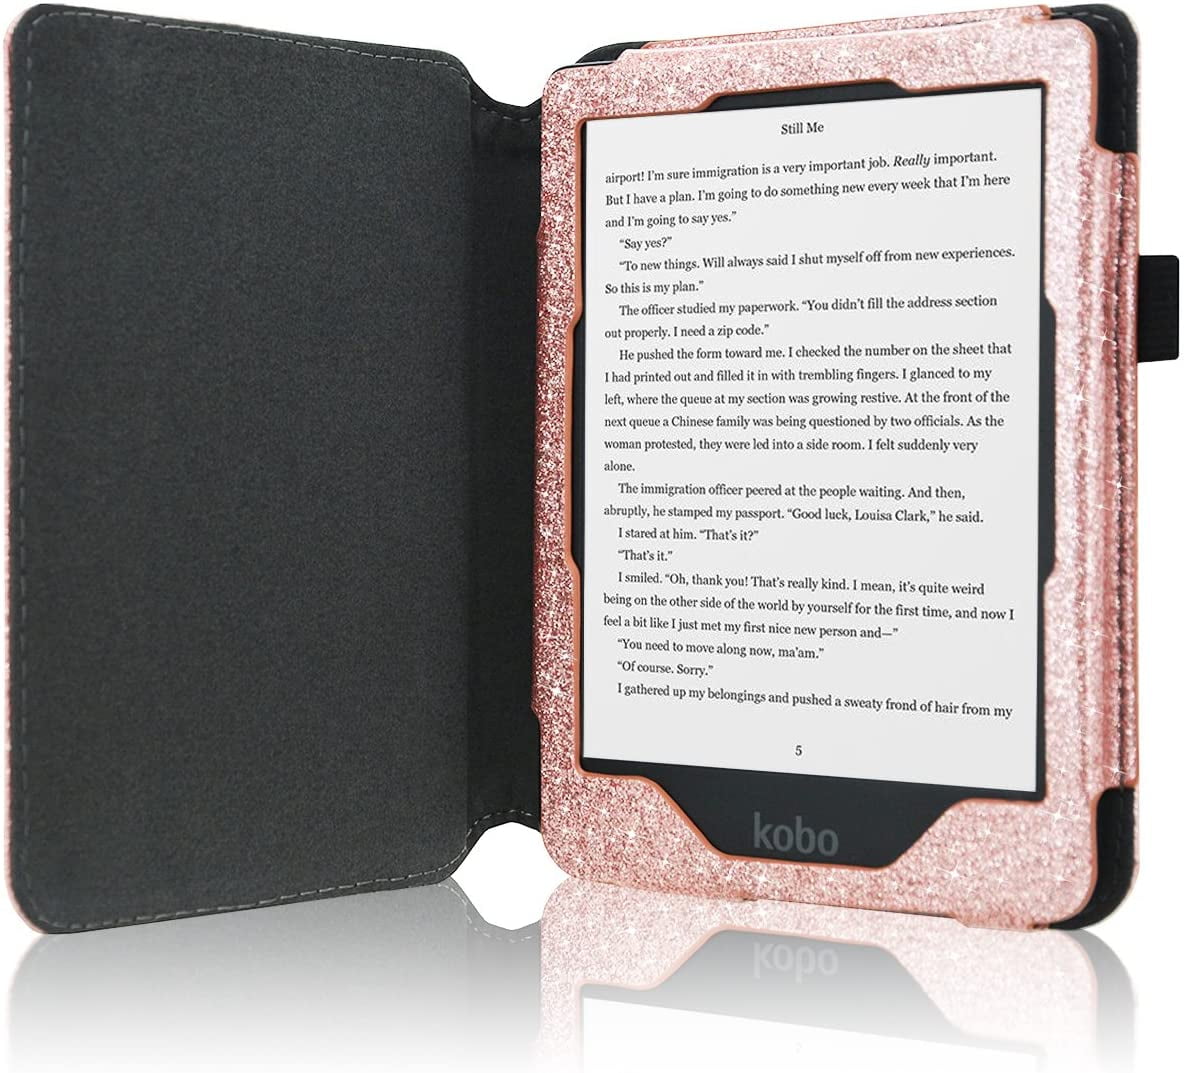 Glitter Rose Gold Support Strap Folio Smart Cover Leather Case with Auto Sleep Wake Feature for All New and Previous Kindle Paperwhite Models ACdream Kindle Paperwhite Case 2018 